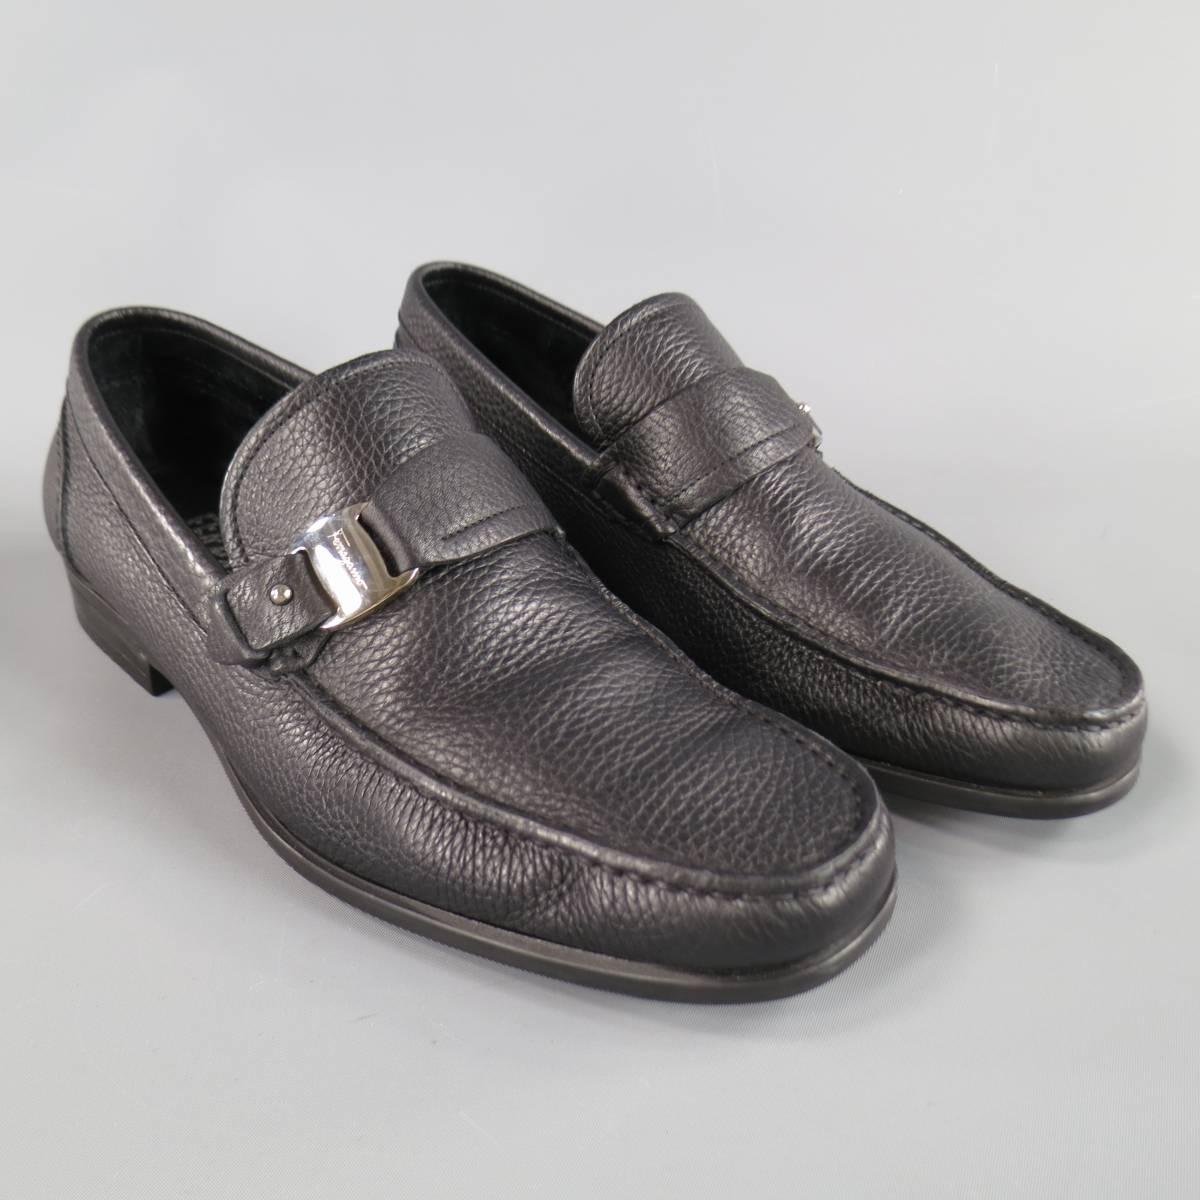 SALVATORE FERRAGAMO Loafer consists of leather material in a black color tone. Designed in a round toe front, moc.toe with silver tone buckle strap. Detailed in a pebbled texture and rubber sole. Made in Italy.
Retails at $495.00.

Excellent